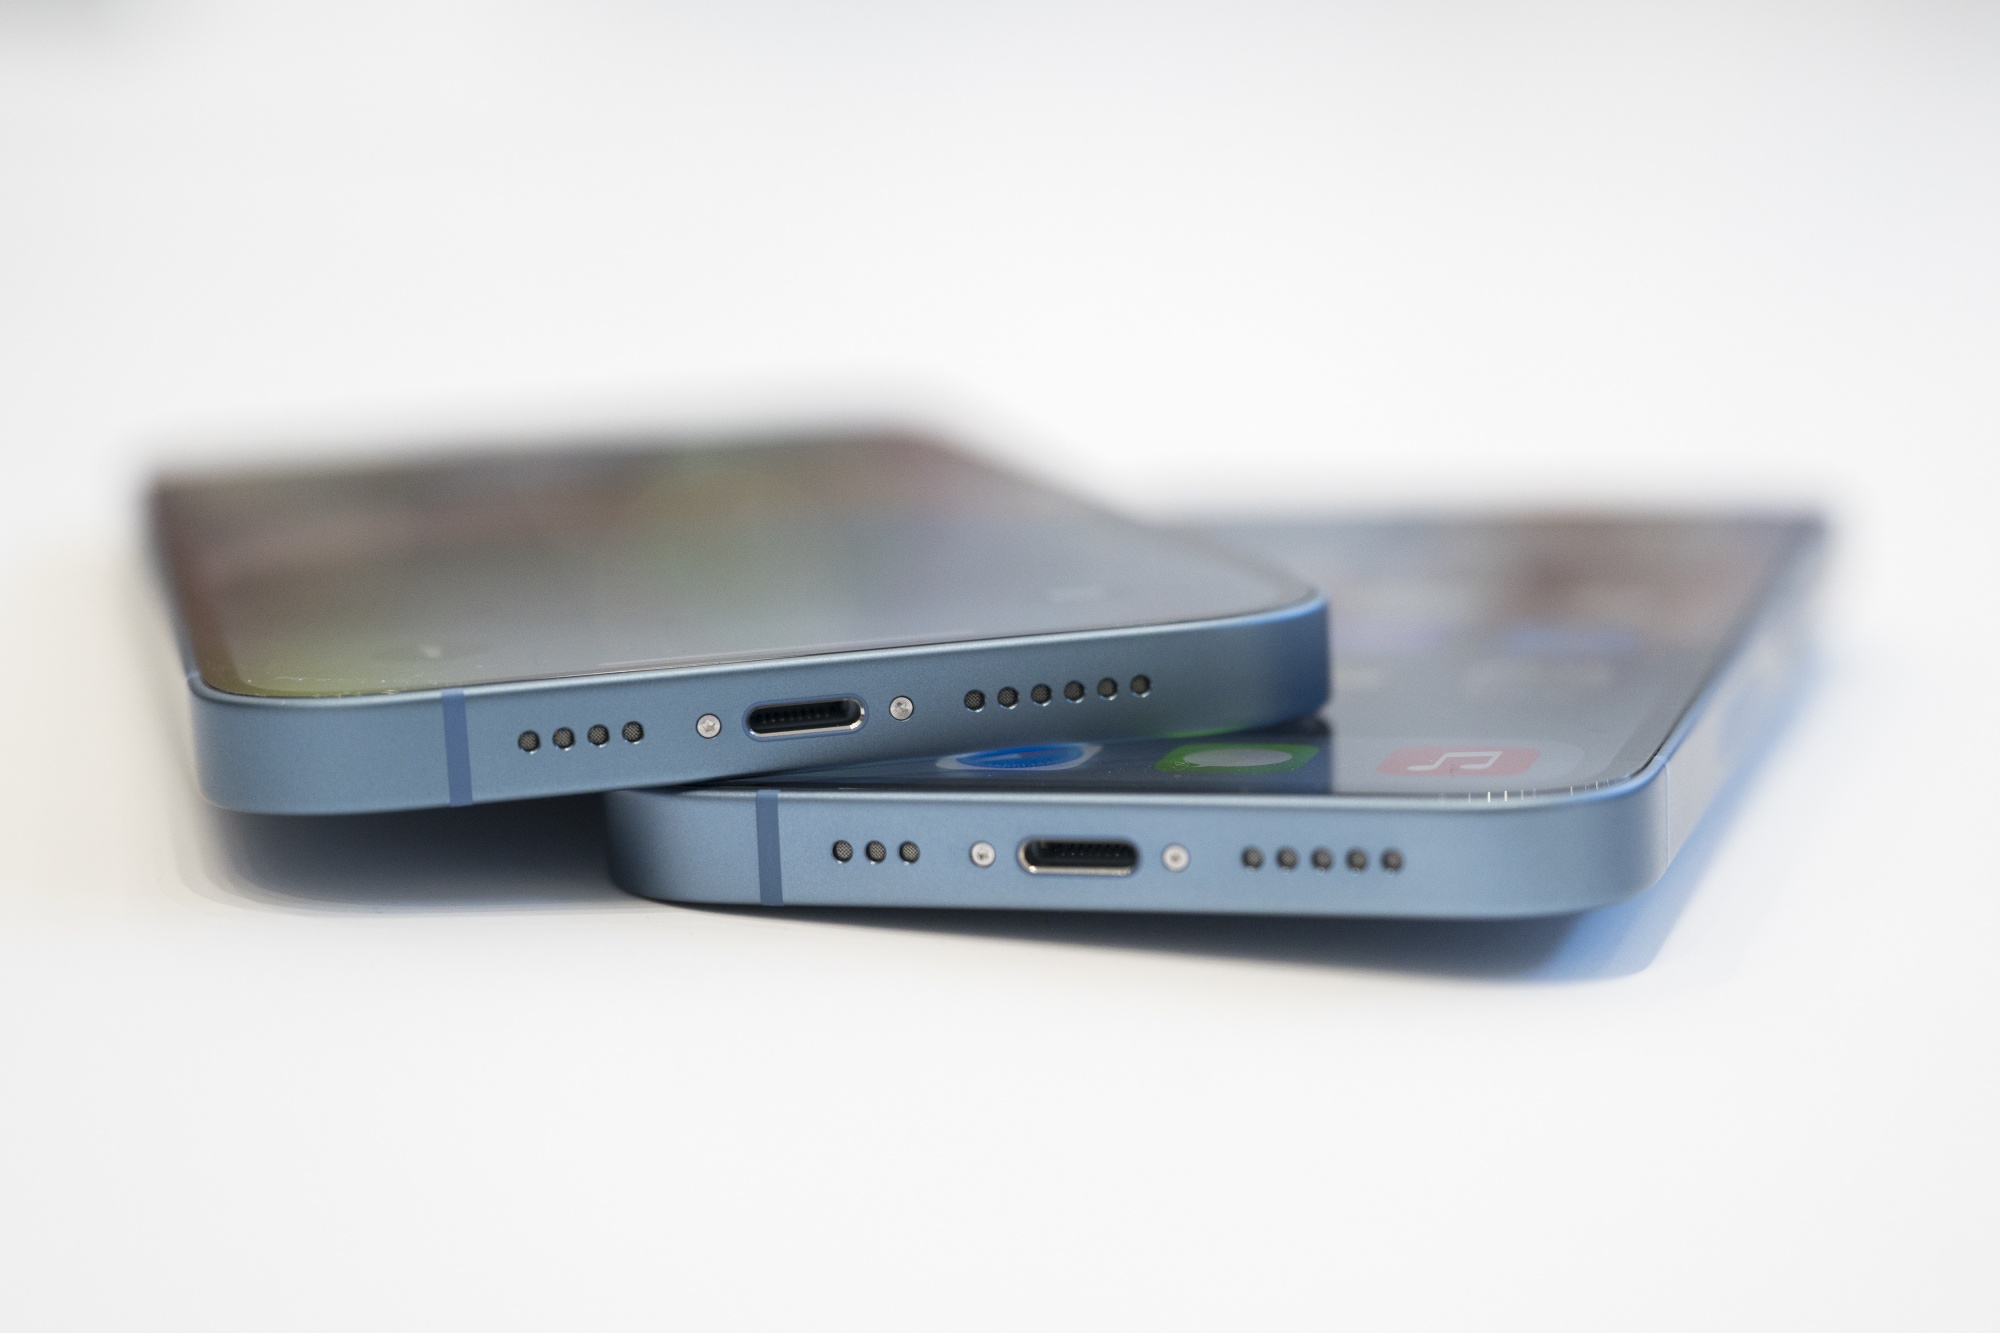 Apple iPhone 15 USB-C Port Will Support Limited Accessories